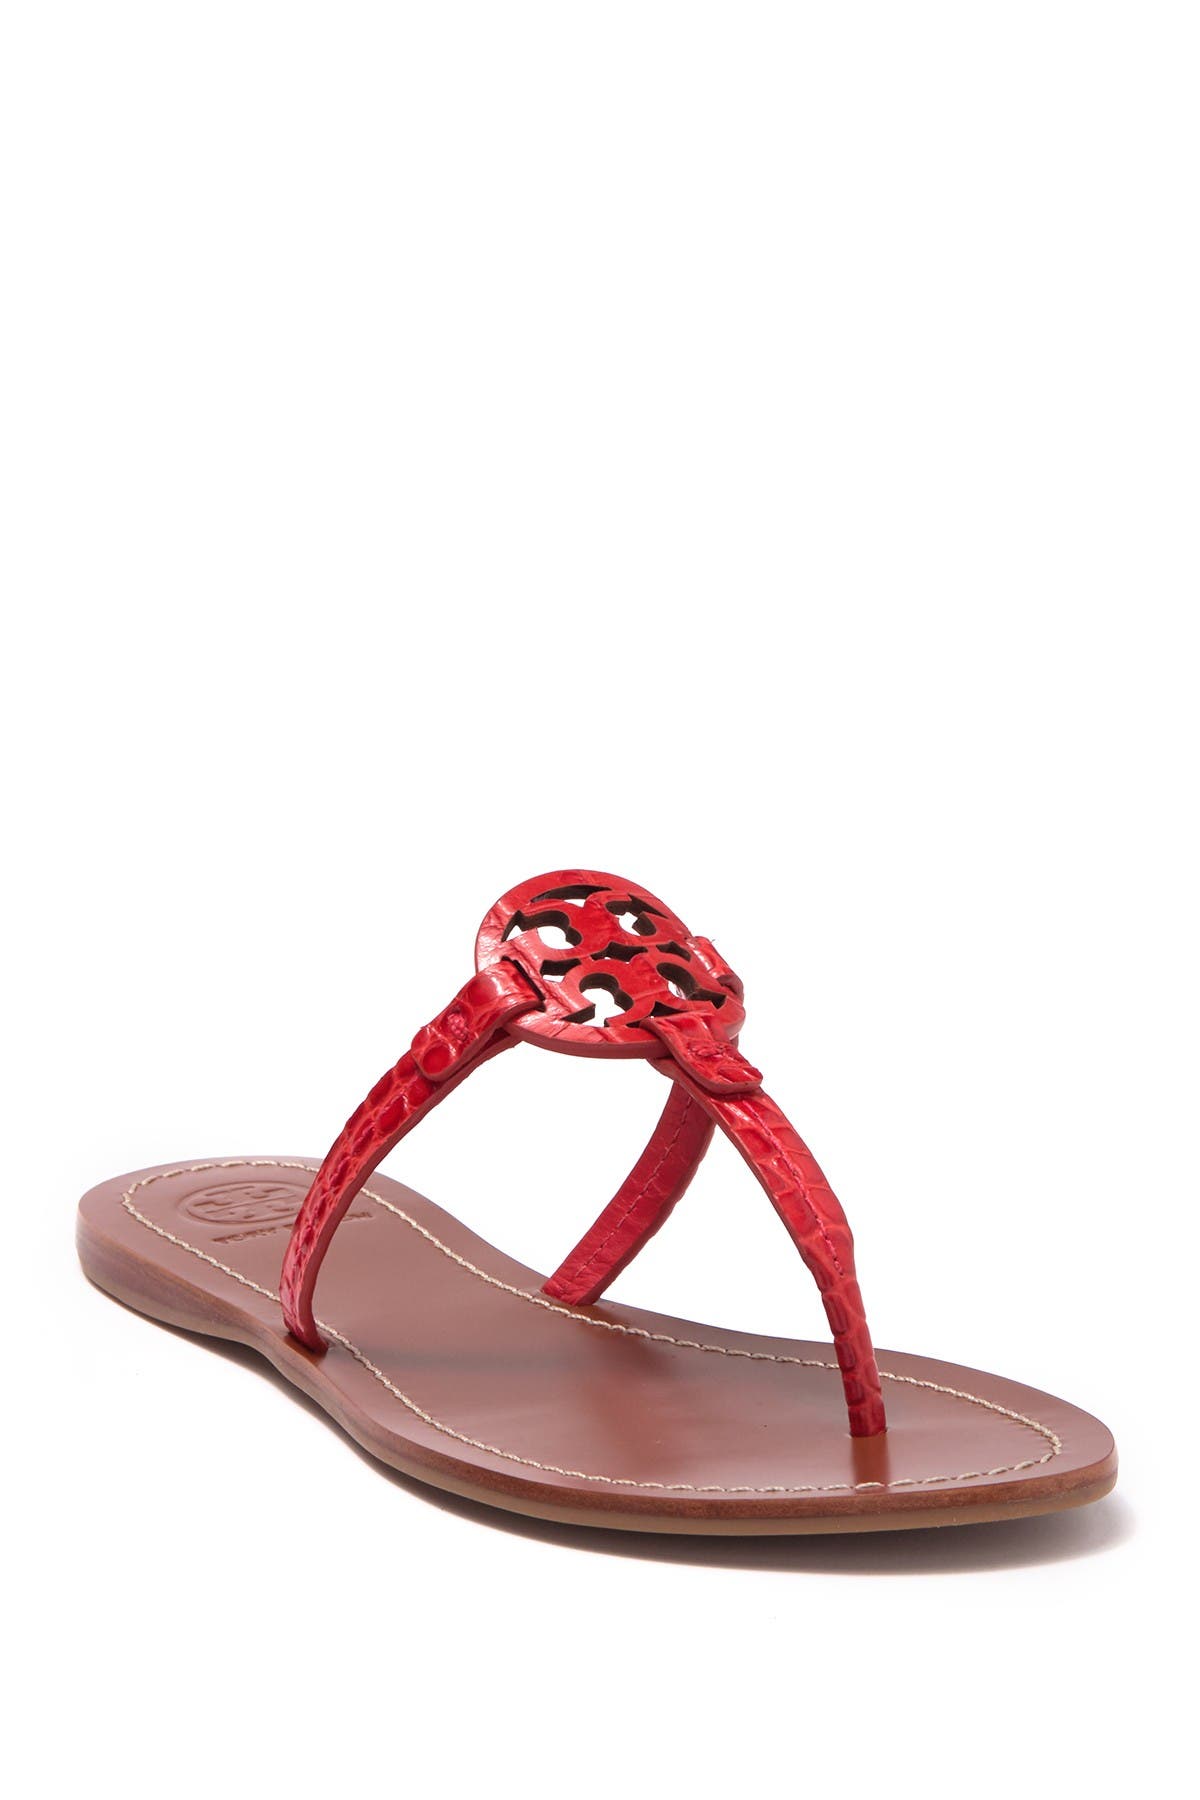 tory burch red thong sandals